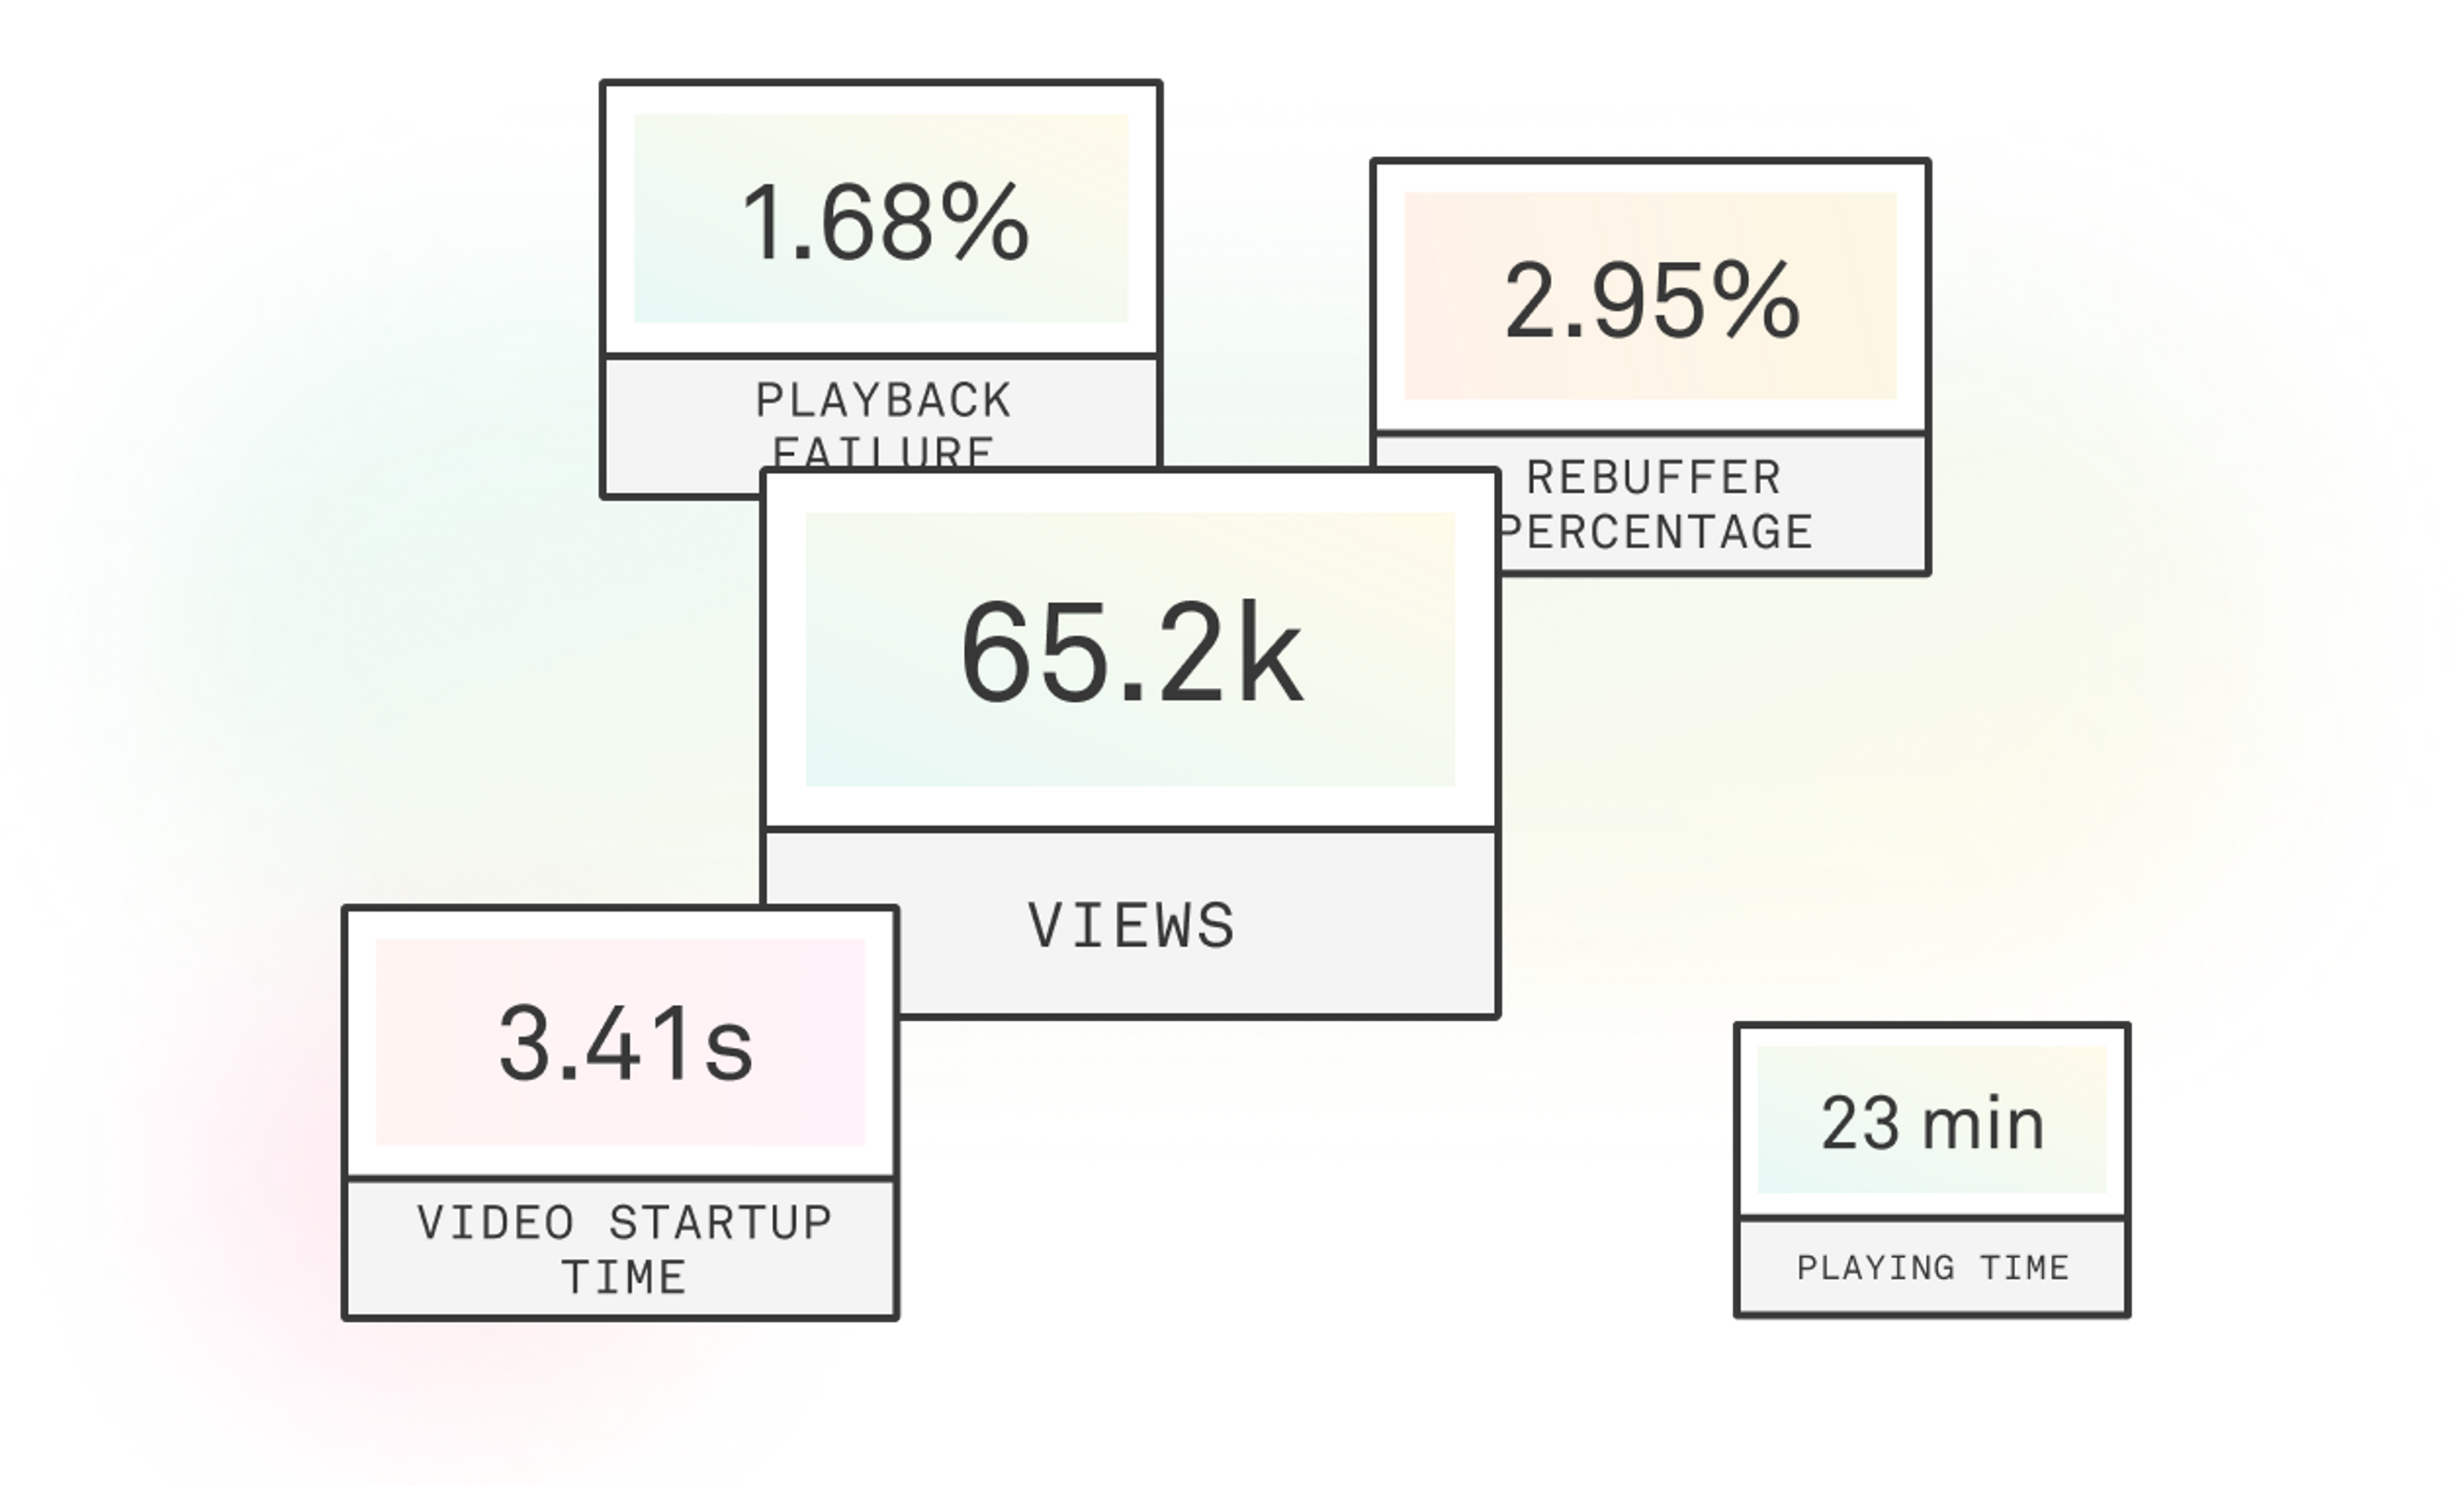 Colorful boxes that read video startup time, 3.41s; views 65.2k, playing time 23 min,  rebuffer percentage 2.95%, playback failure 1.68%